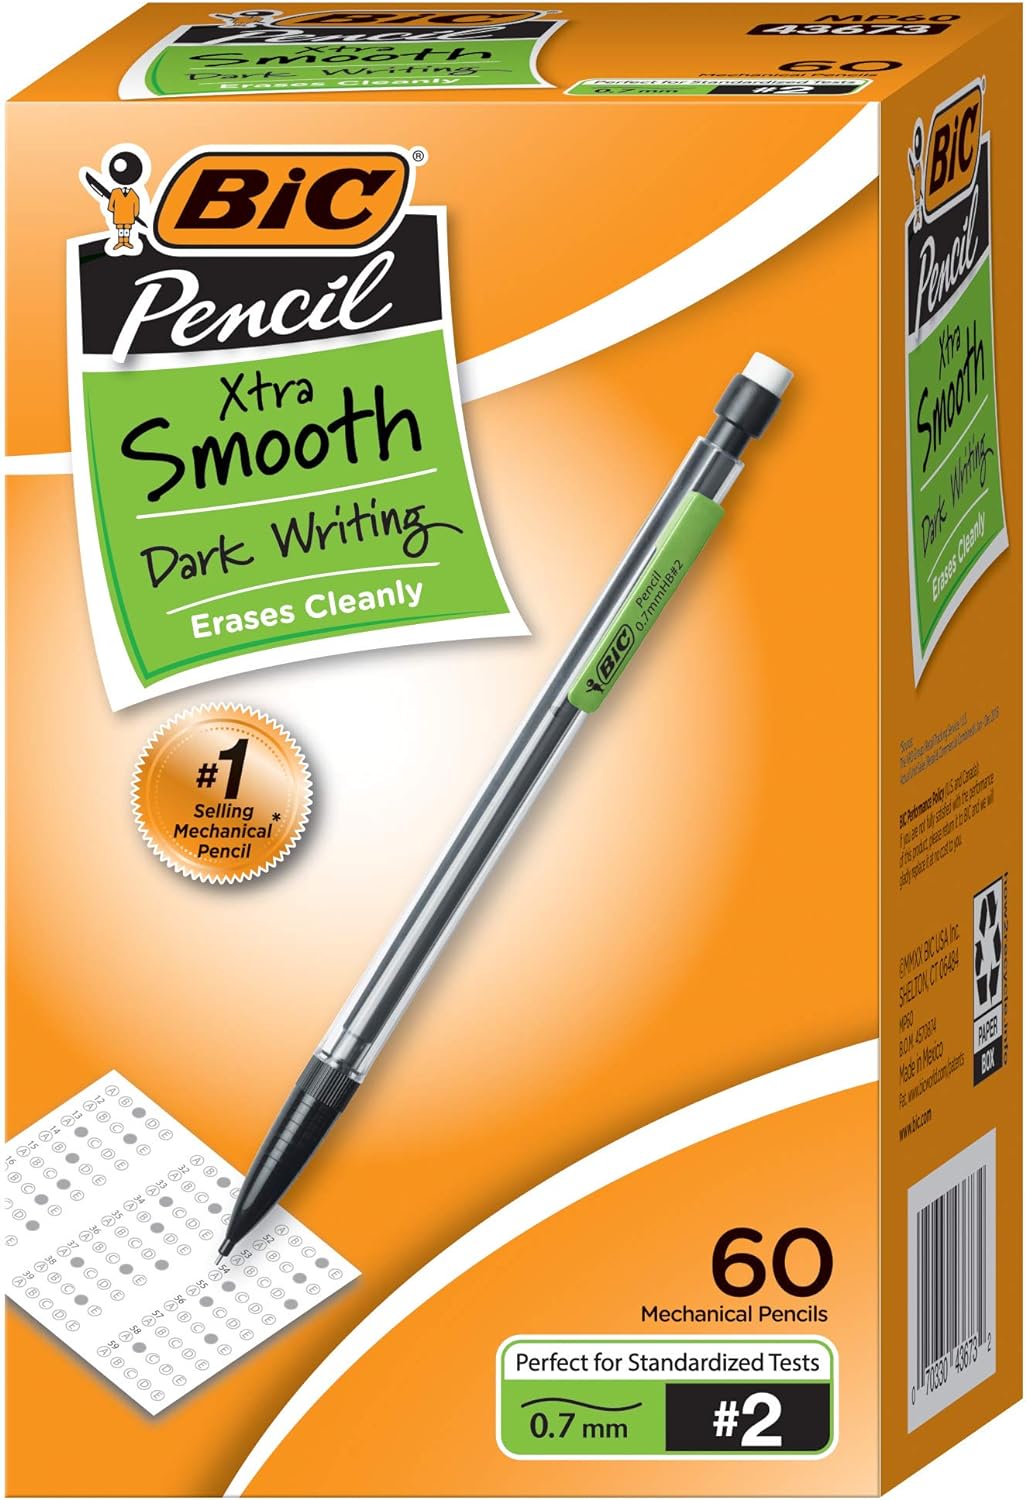 I love these pencils for teaching math. I use them for instruction by writing on a spiral notebook and projecting it with a document camera. They write so smooth! My students never have a problem seeing the writing on the wall (projector screen)! Students have been stealing them off my desk because they love them, too. I teach middle school math! (The eraser works great, too!)